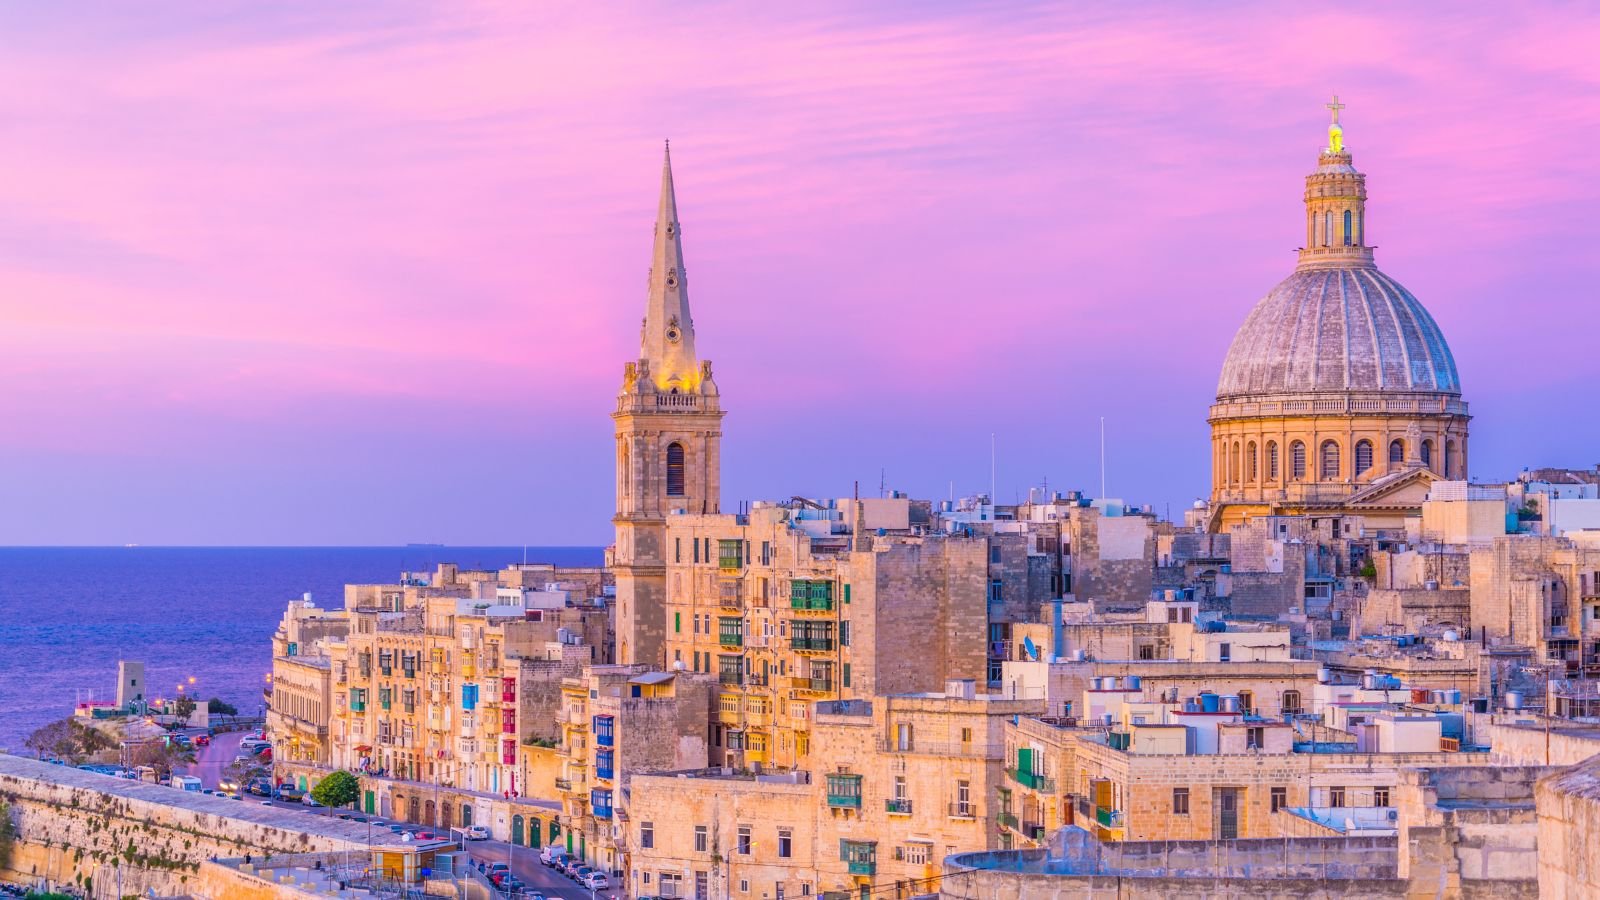 <p><a href="https://livingcost.org/cost/malta/valletta" rel="noopener">Average Cost Of Living</a> (Per Person) – $726</p> <p>Average Rent and Utilities (Per Person)- $931</p> <p>Valletta is a treasure trove of history and beauty in the heart of the Mediterranean. With living costs ranging from $1000 to $2000 monthly, it offers exceptional value within the EU. This UNESCO World Heritage city is steeped in rich history and adorned with Baroque architecture, providing a picturesque backdrop for retirees and expats alike. Residents of Valletta enjoy established healthcare, ease of travel across Europe, and a vibrant cultural scene that caters to all ages.</p>